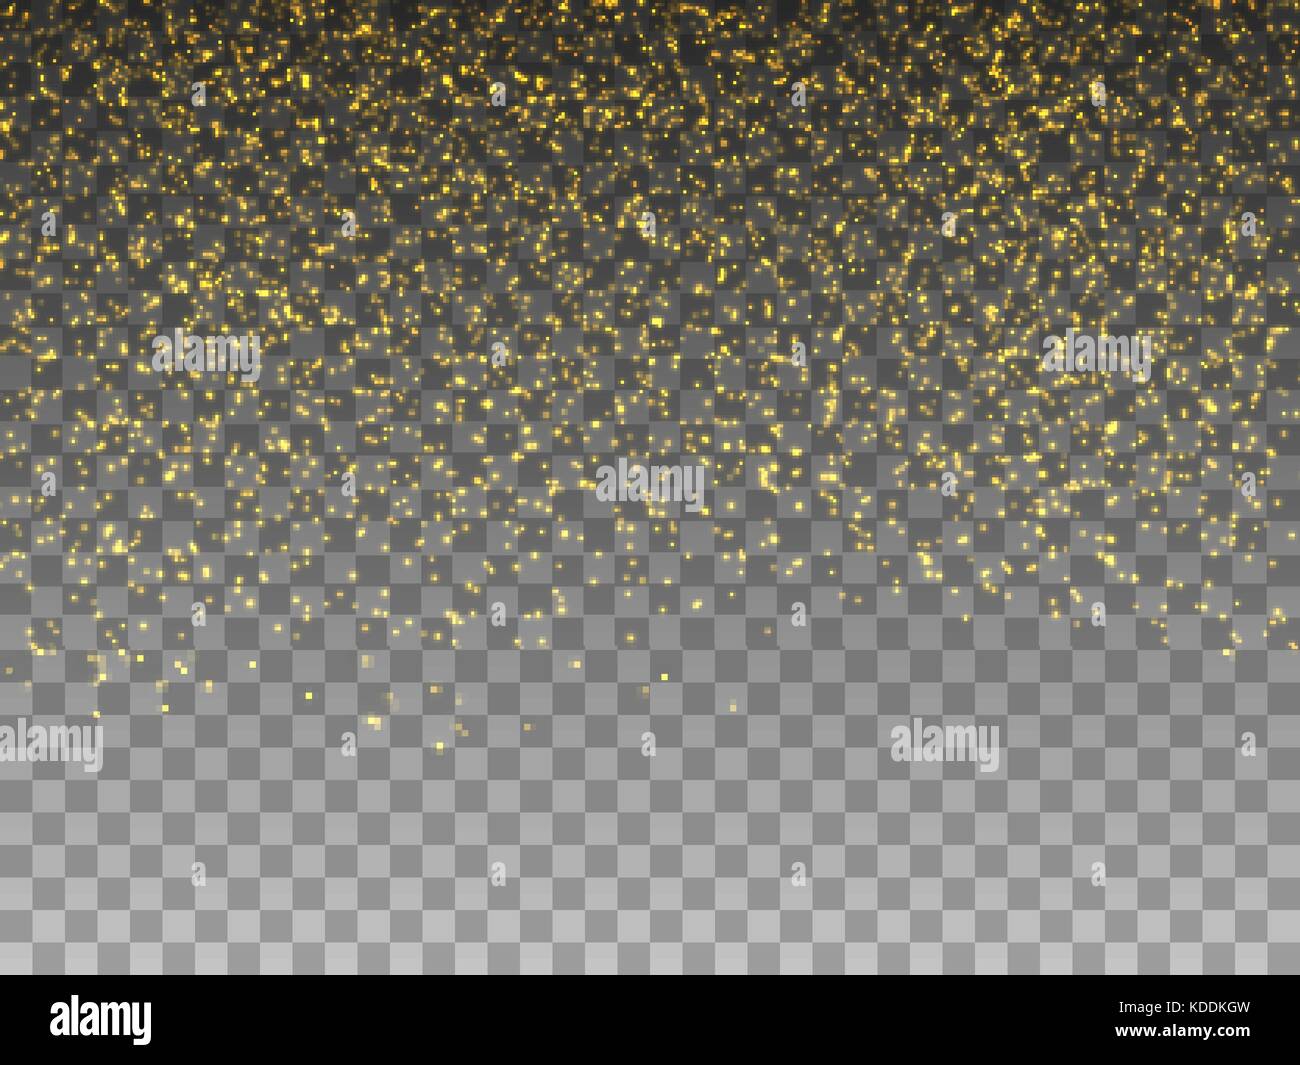 Gold Dust Glitter PNG Transparent Images Free Download, Vector Files